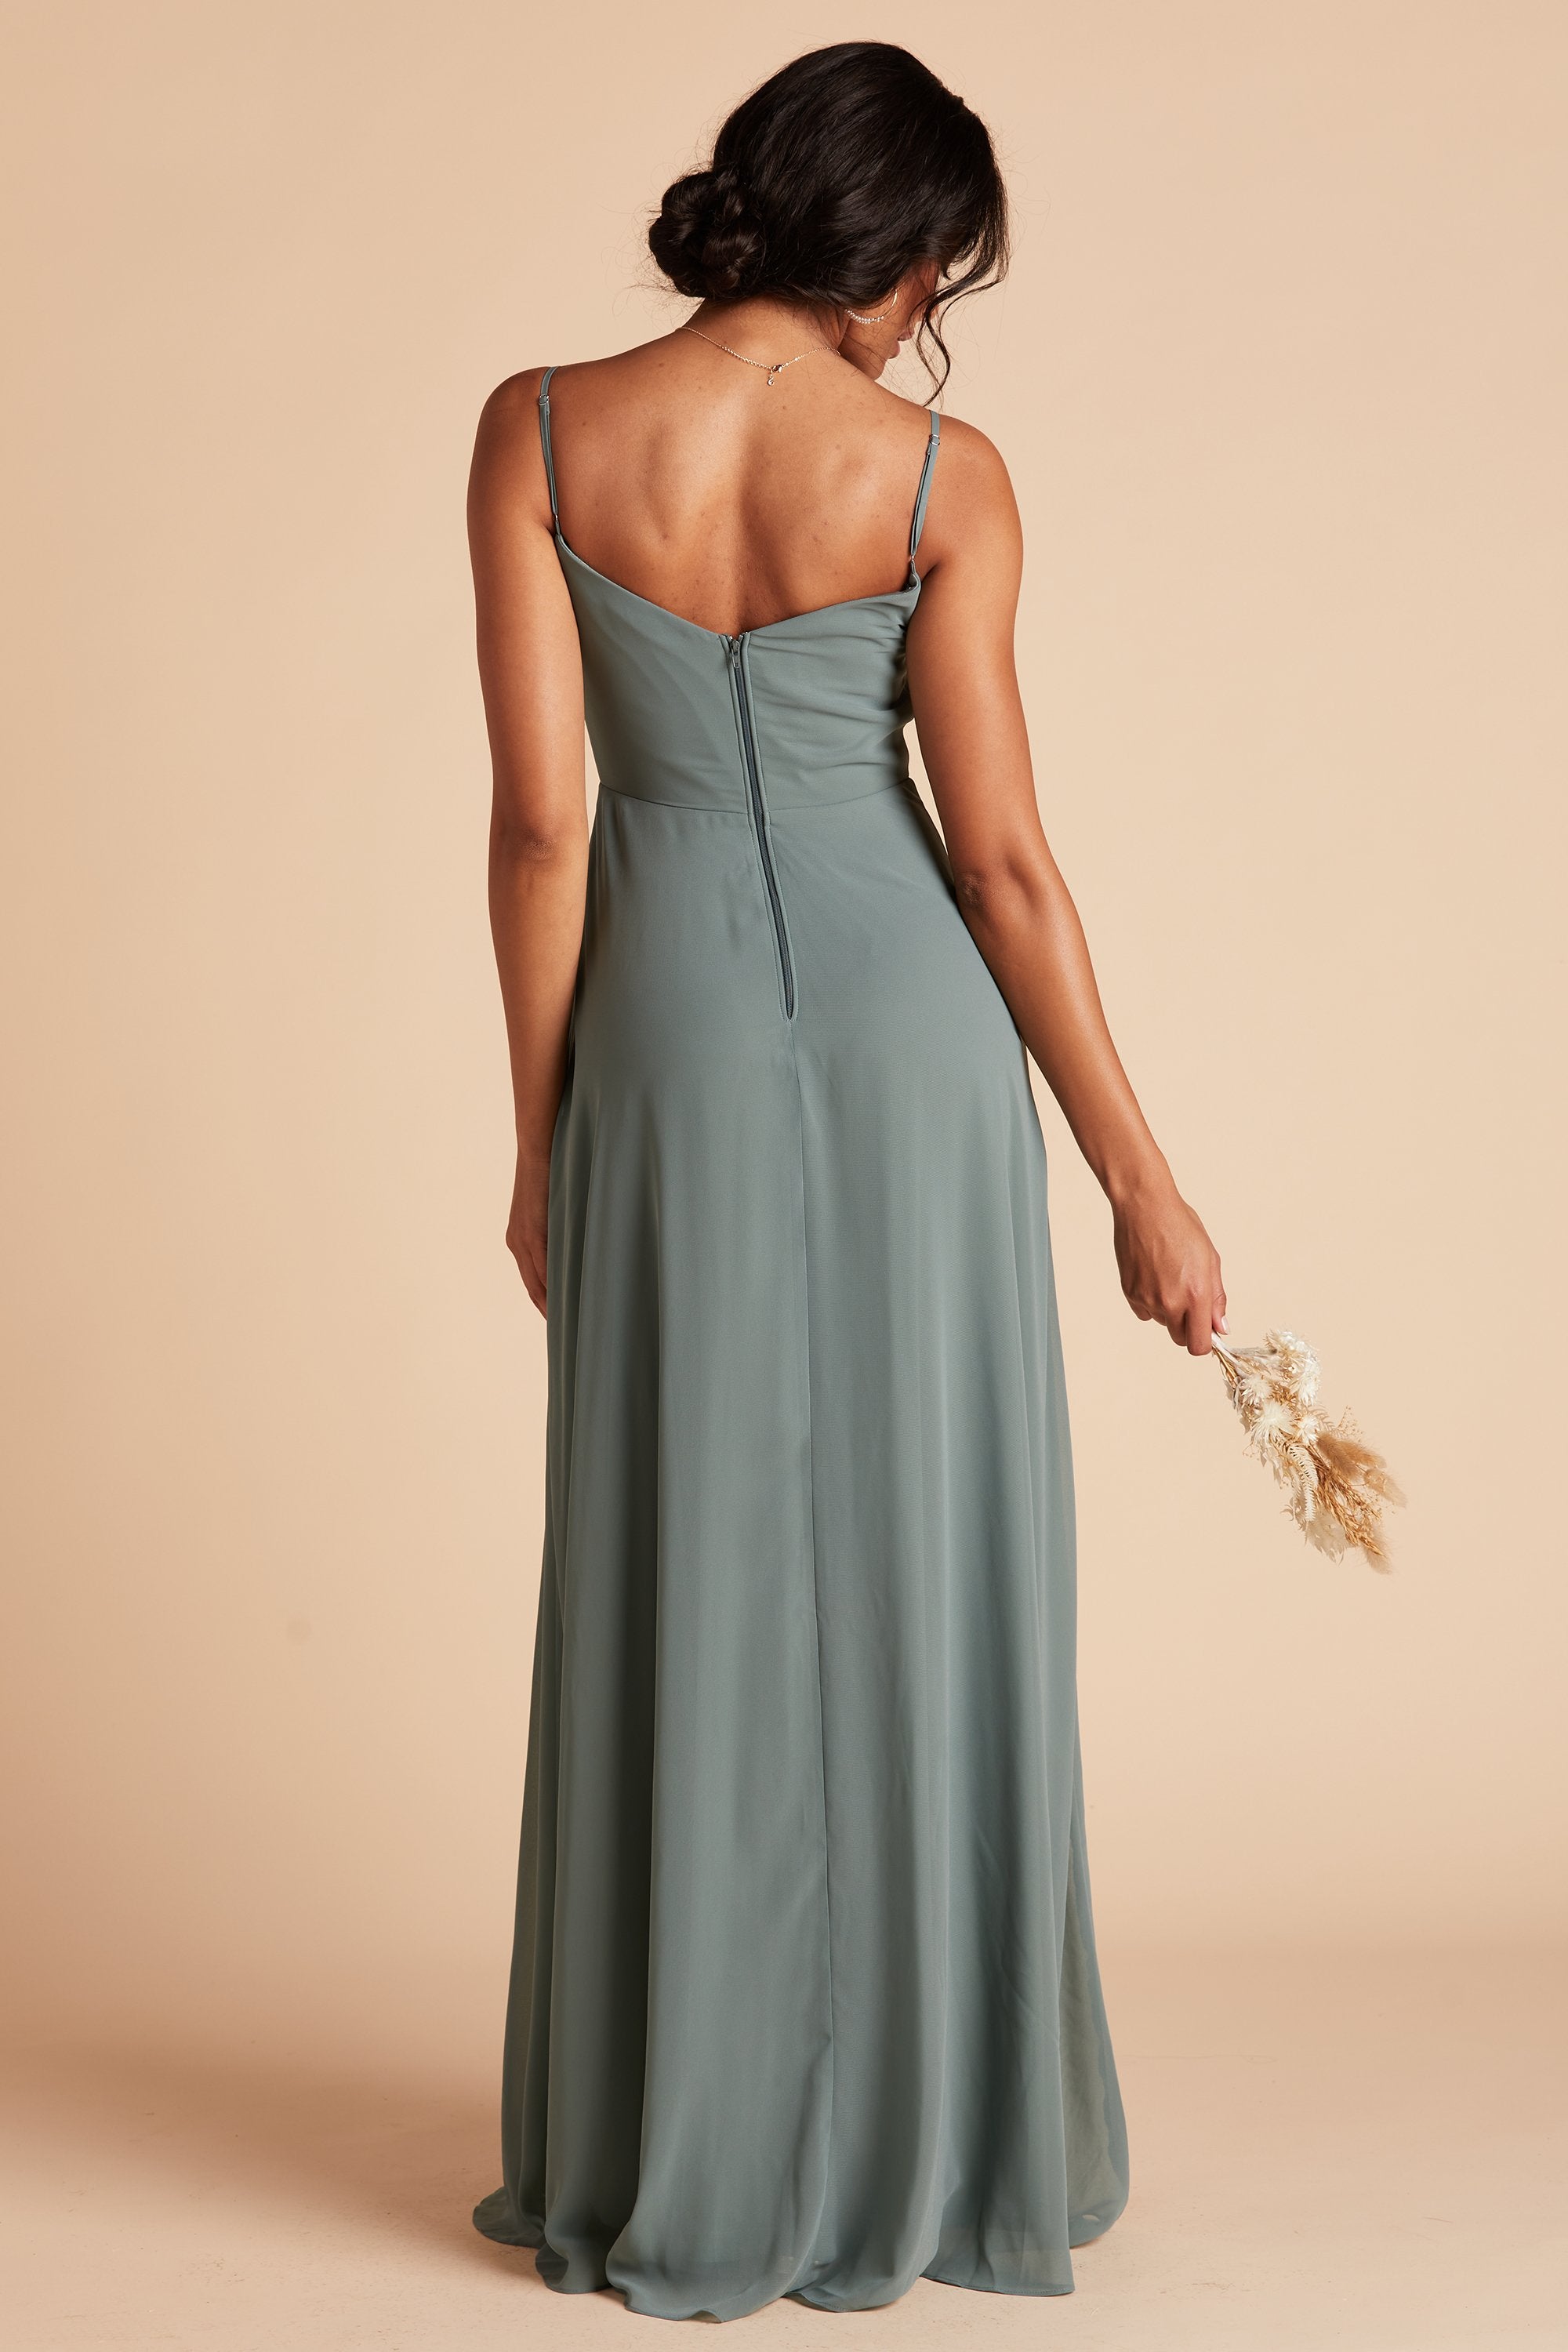 Devin convertible bridesmaids dress in sea glass green chiffon by Birdy Grey, back view